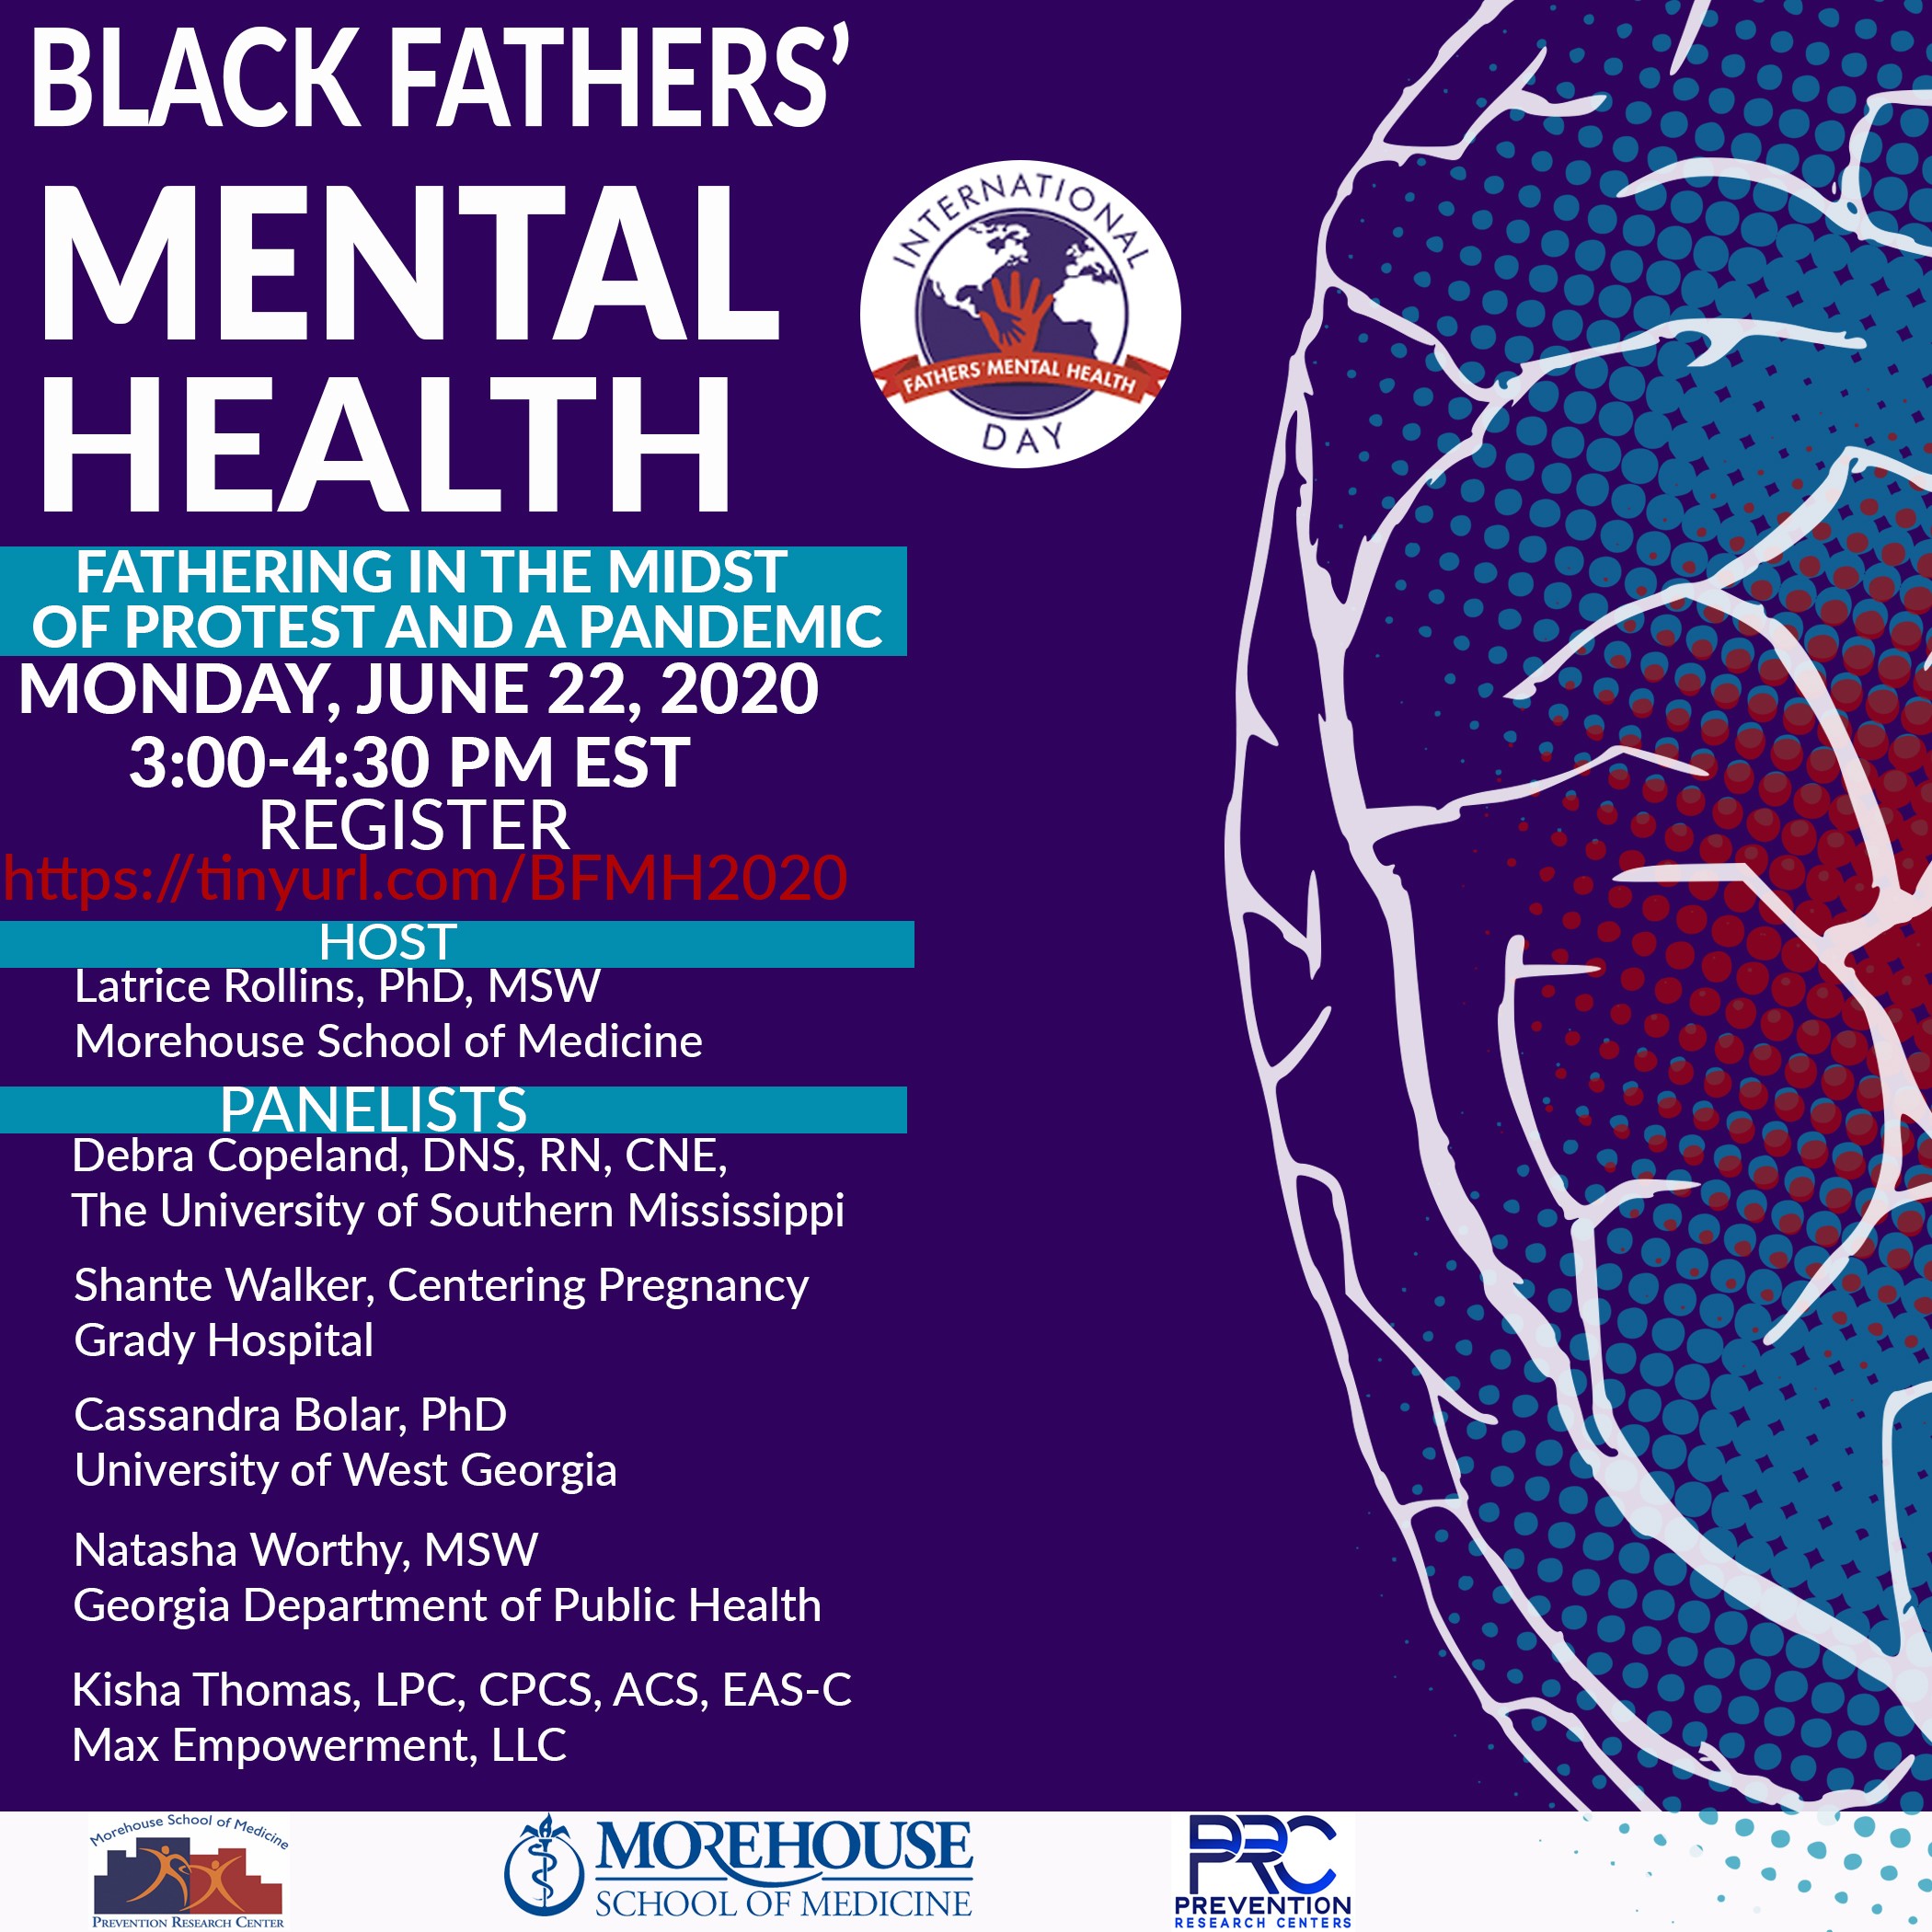 June 22 International Fathers’ Mental Health Day and Black Fathers